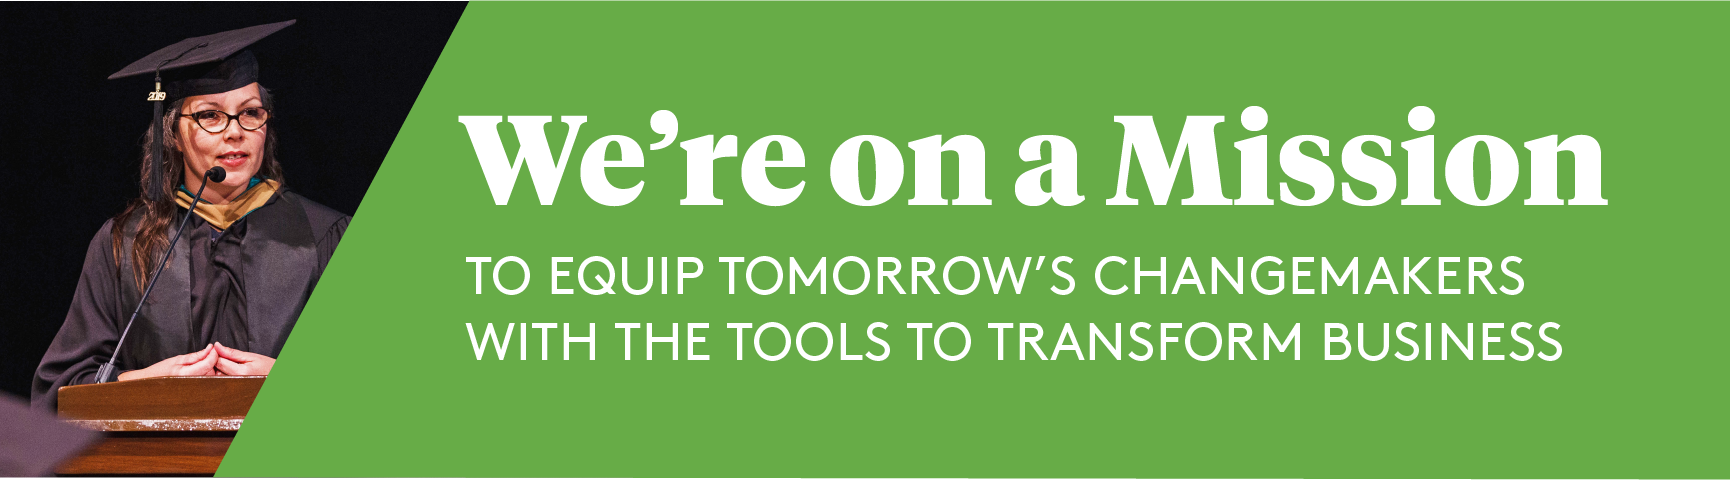 We're on a mission to equip tomorrow's changemakers with the tools to transform business